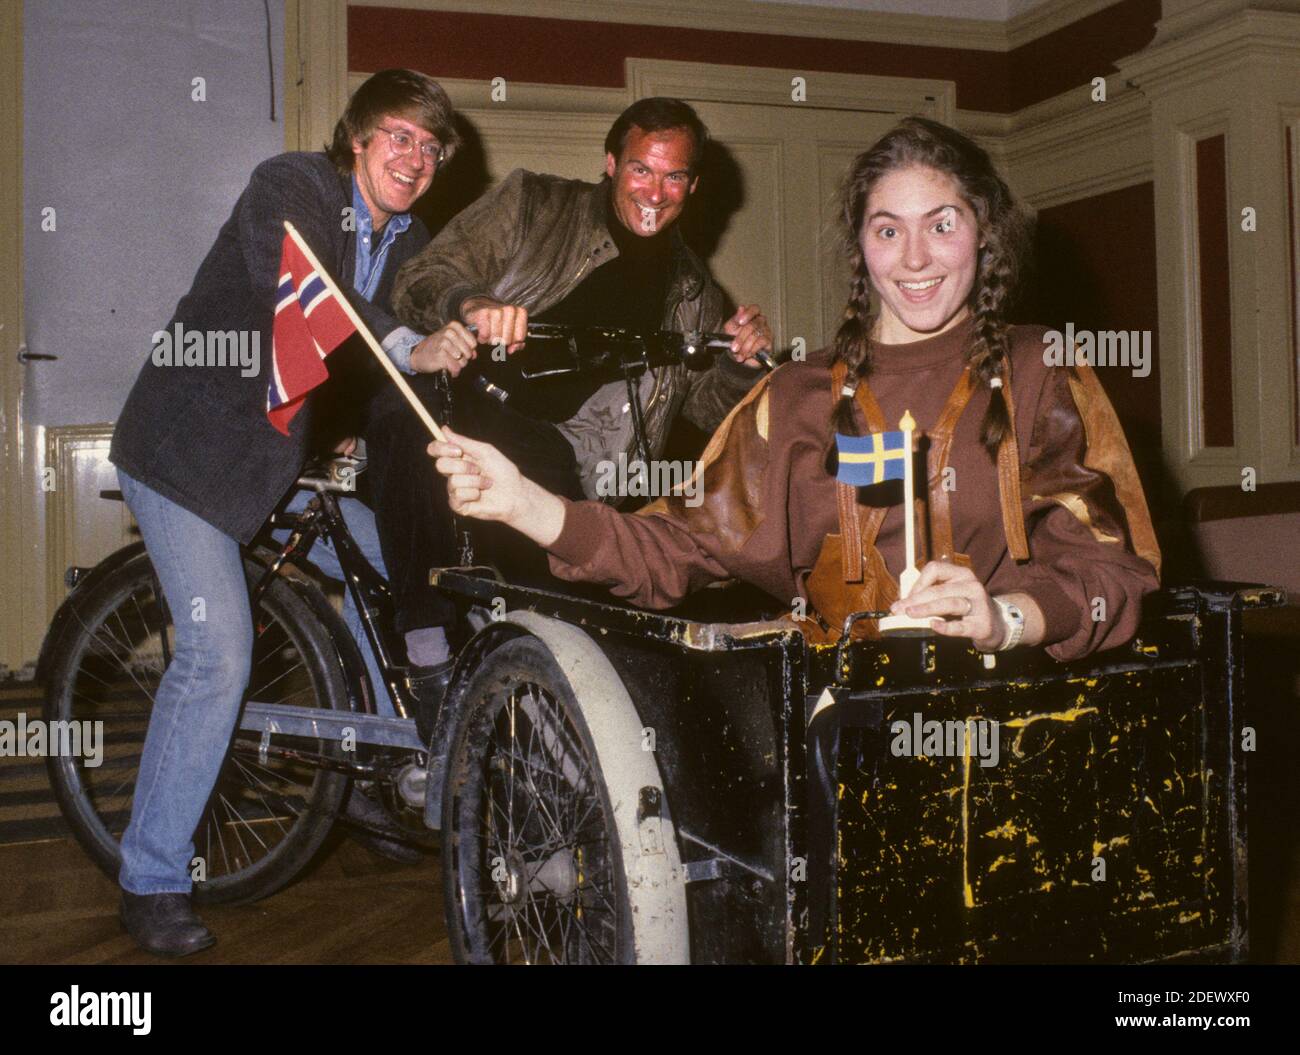 SISSEL KYRKJEBÖ Norwegin artist with pianist Stefan Nilsson and songwriter Lasse Holm on a transport cycle Stock Photo